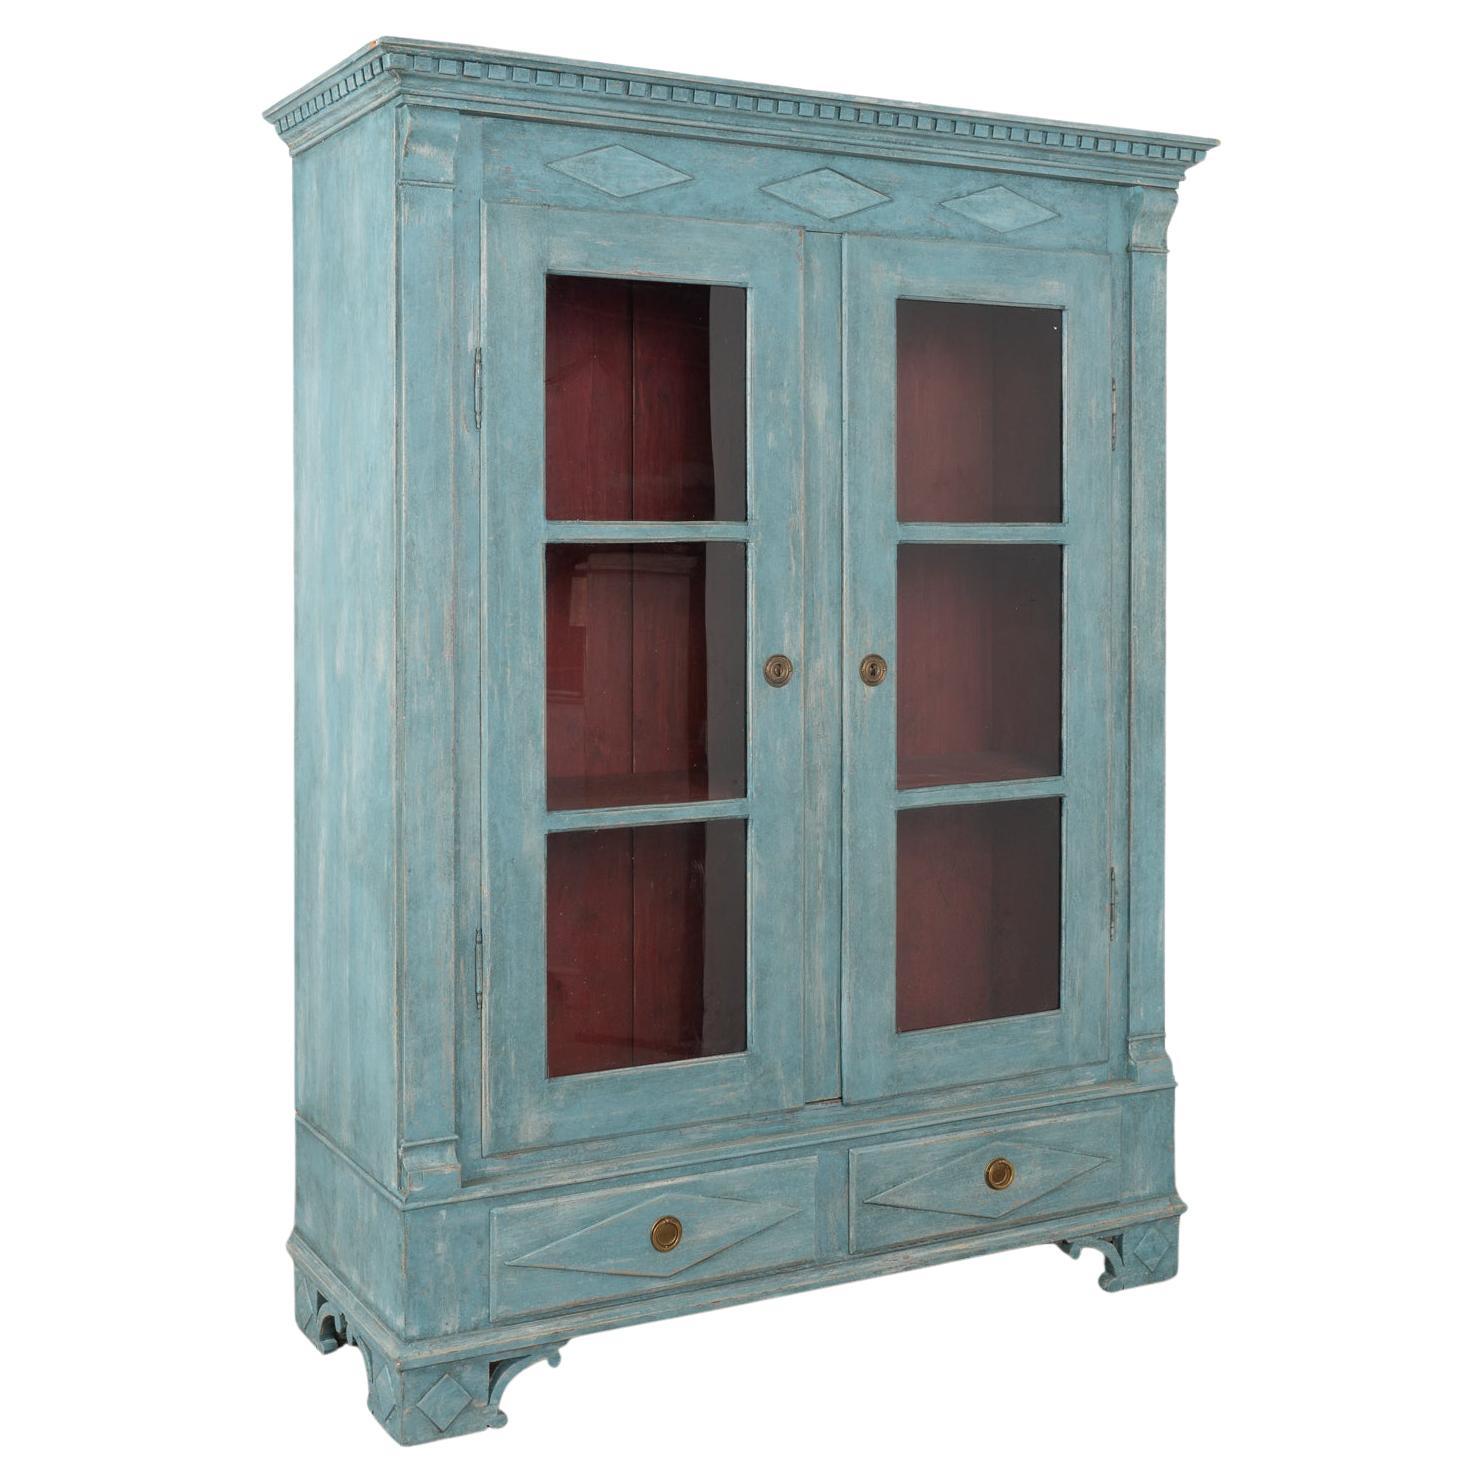 Blue Painted Bookcase Display Cabinet with Glass Doors, Denmark circa 1840